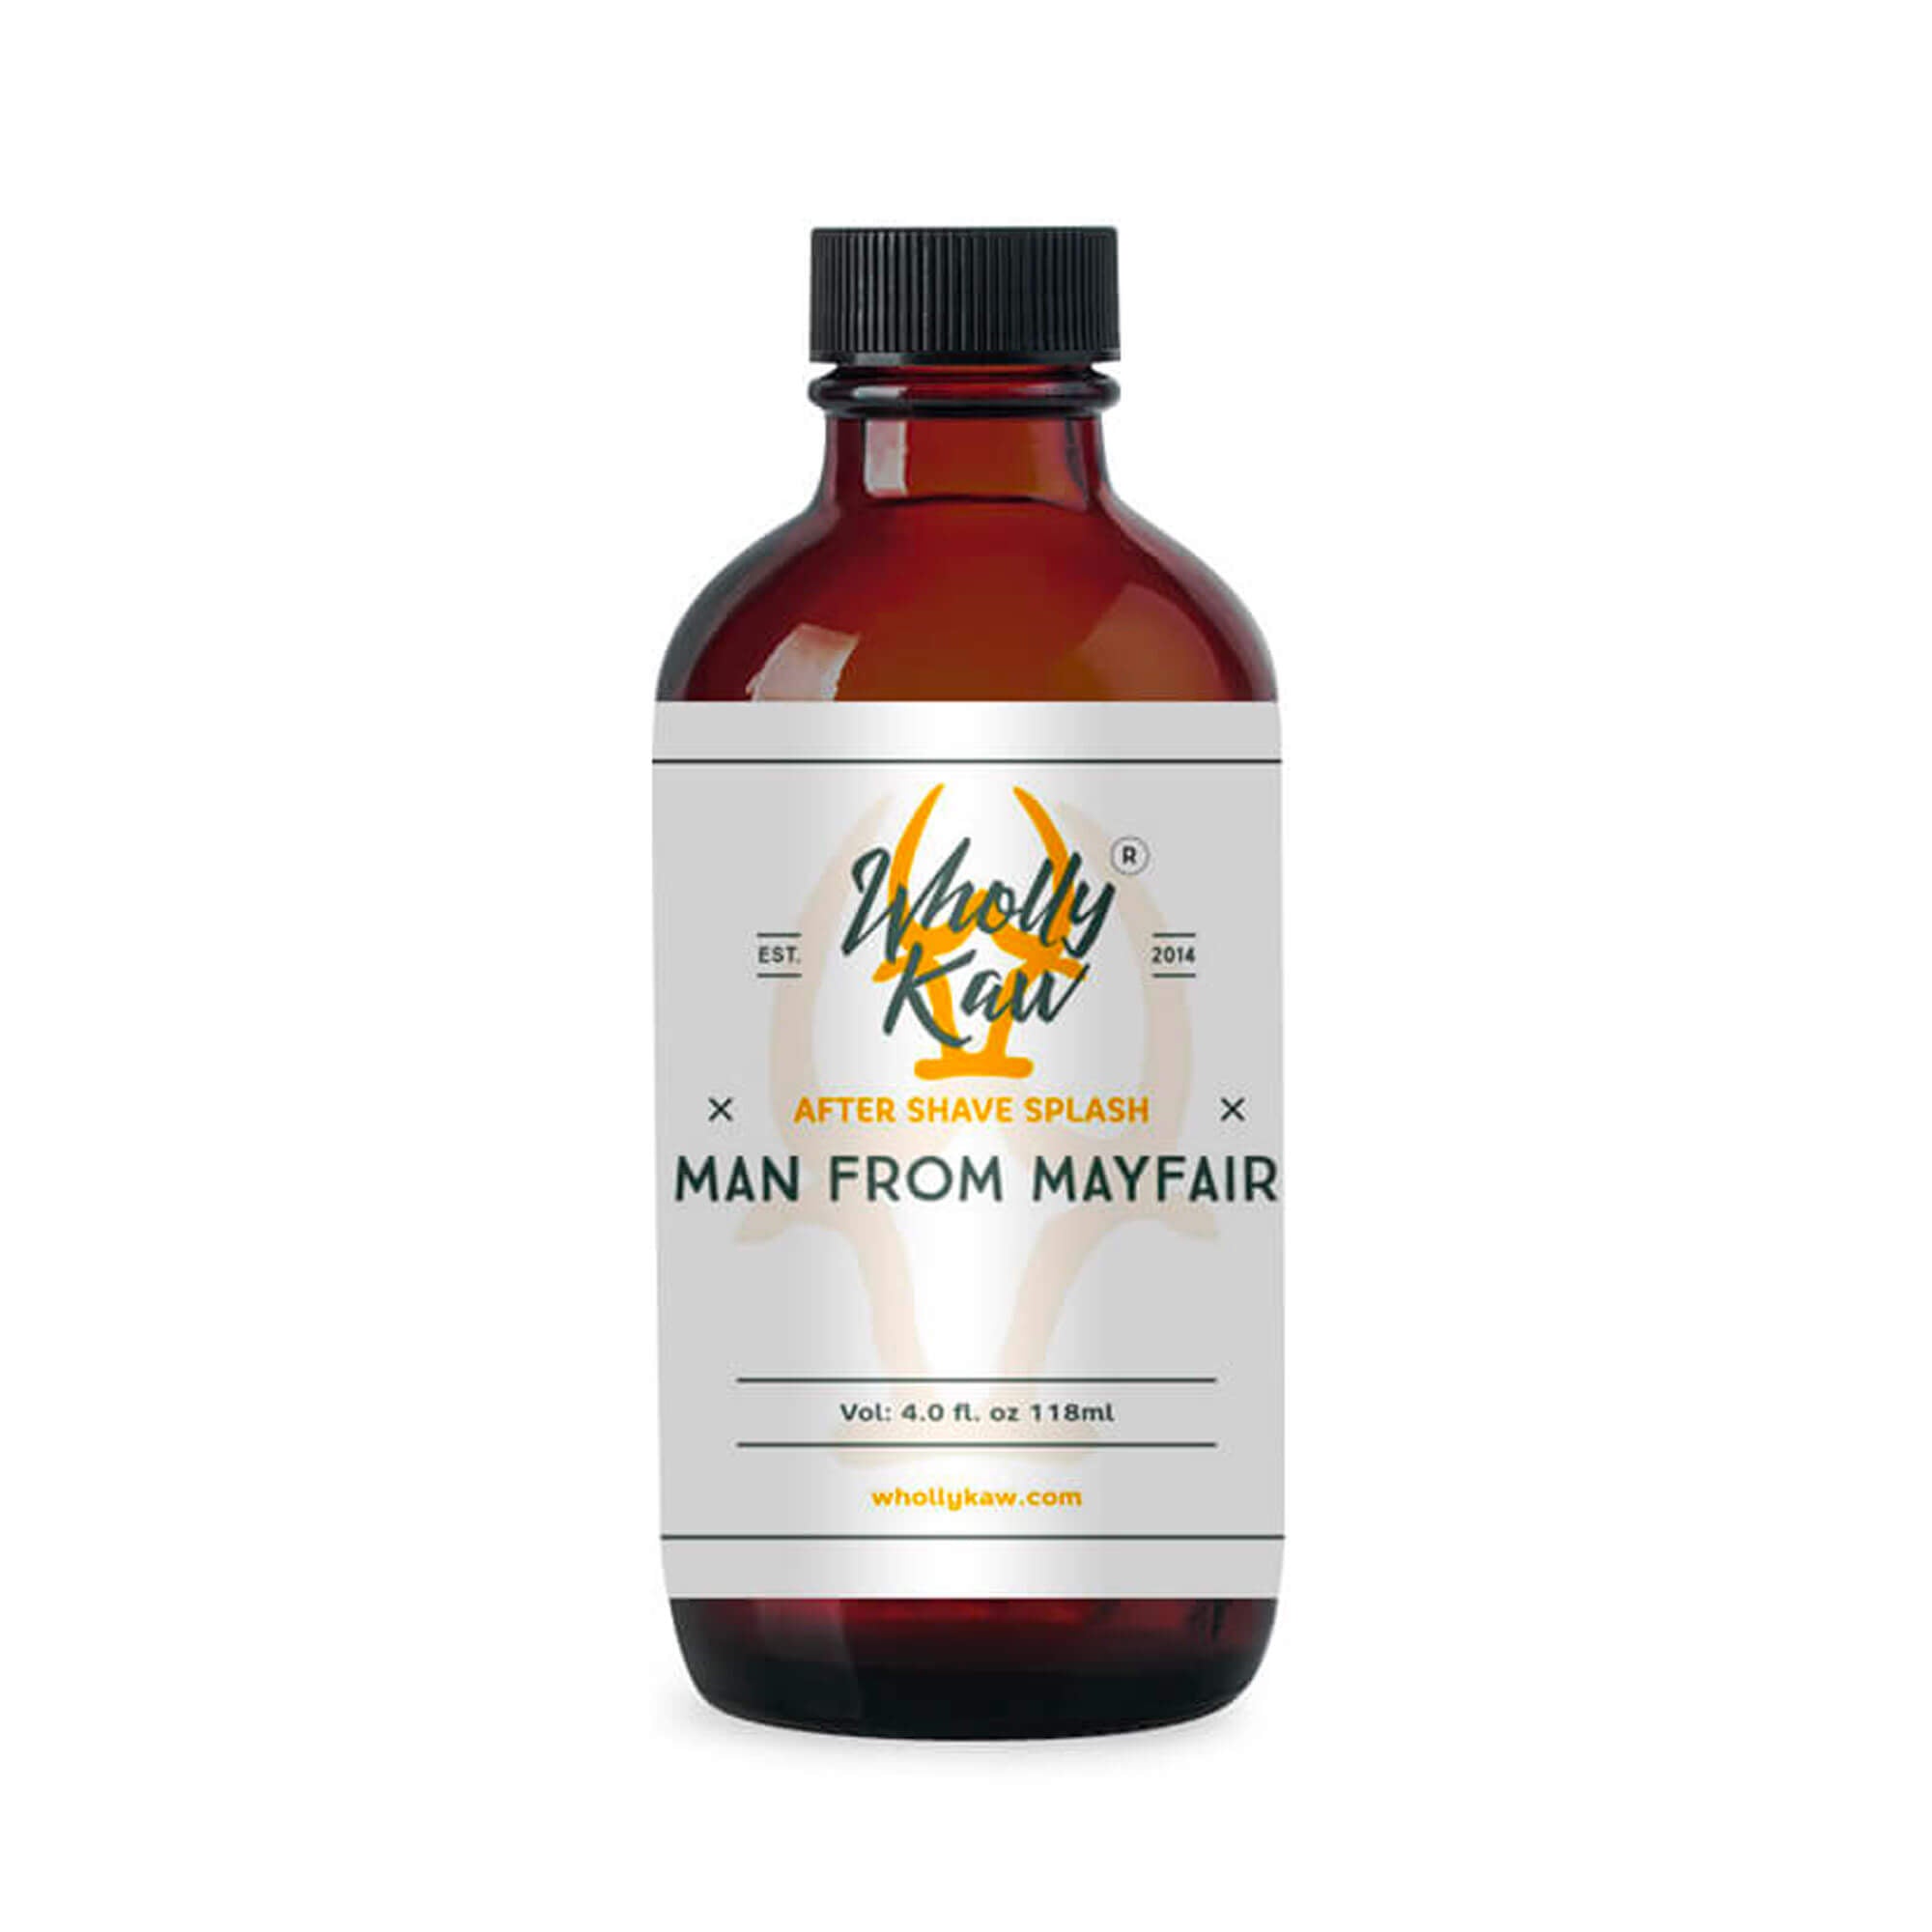 Wholly Kaw Man From Mayfair Aftershave Splash